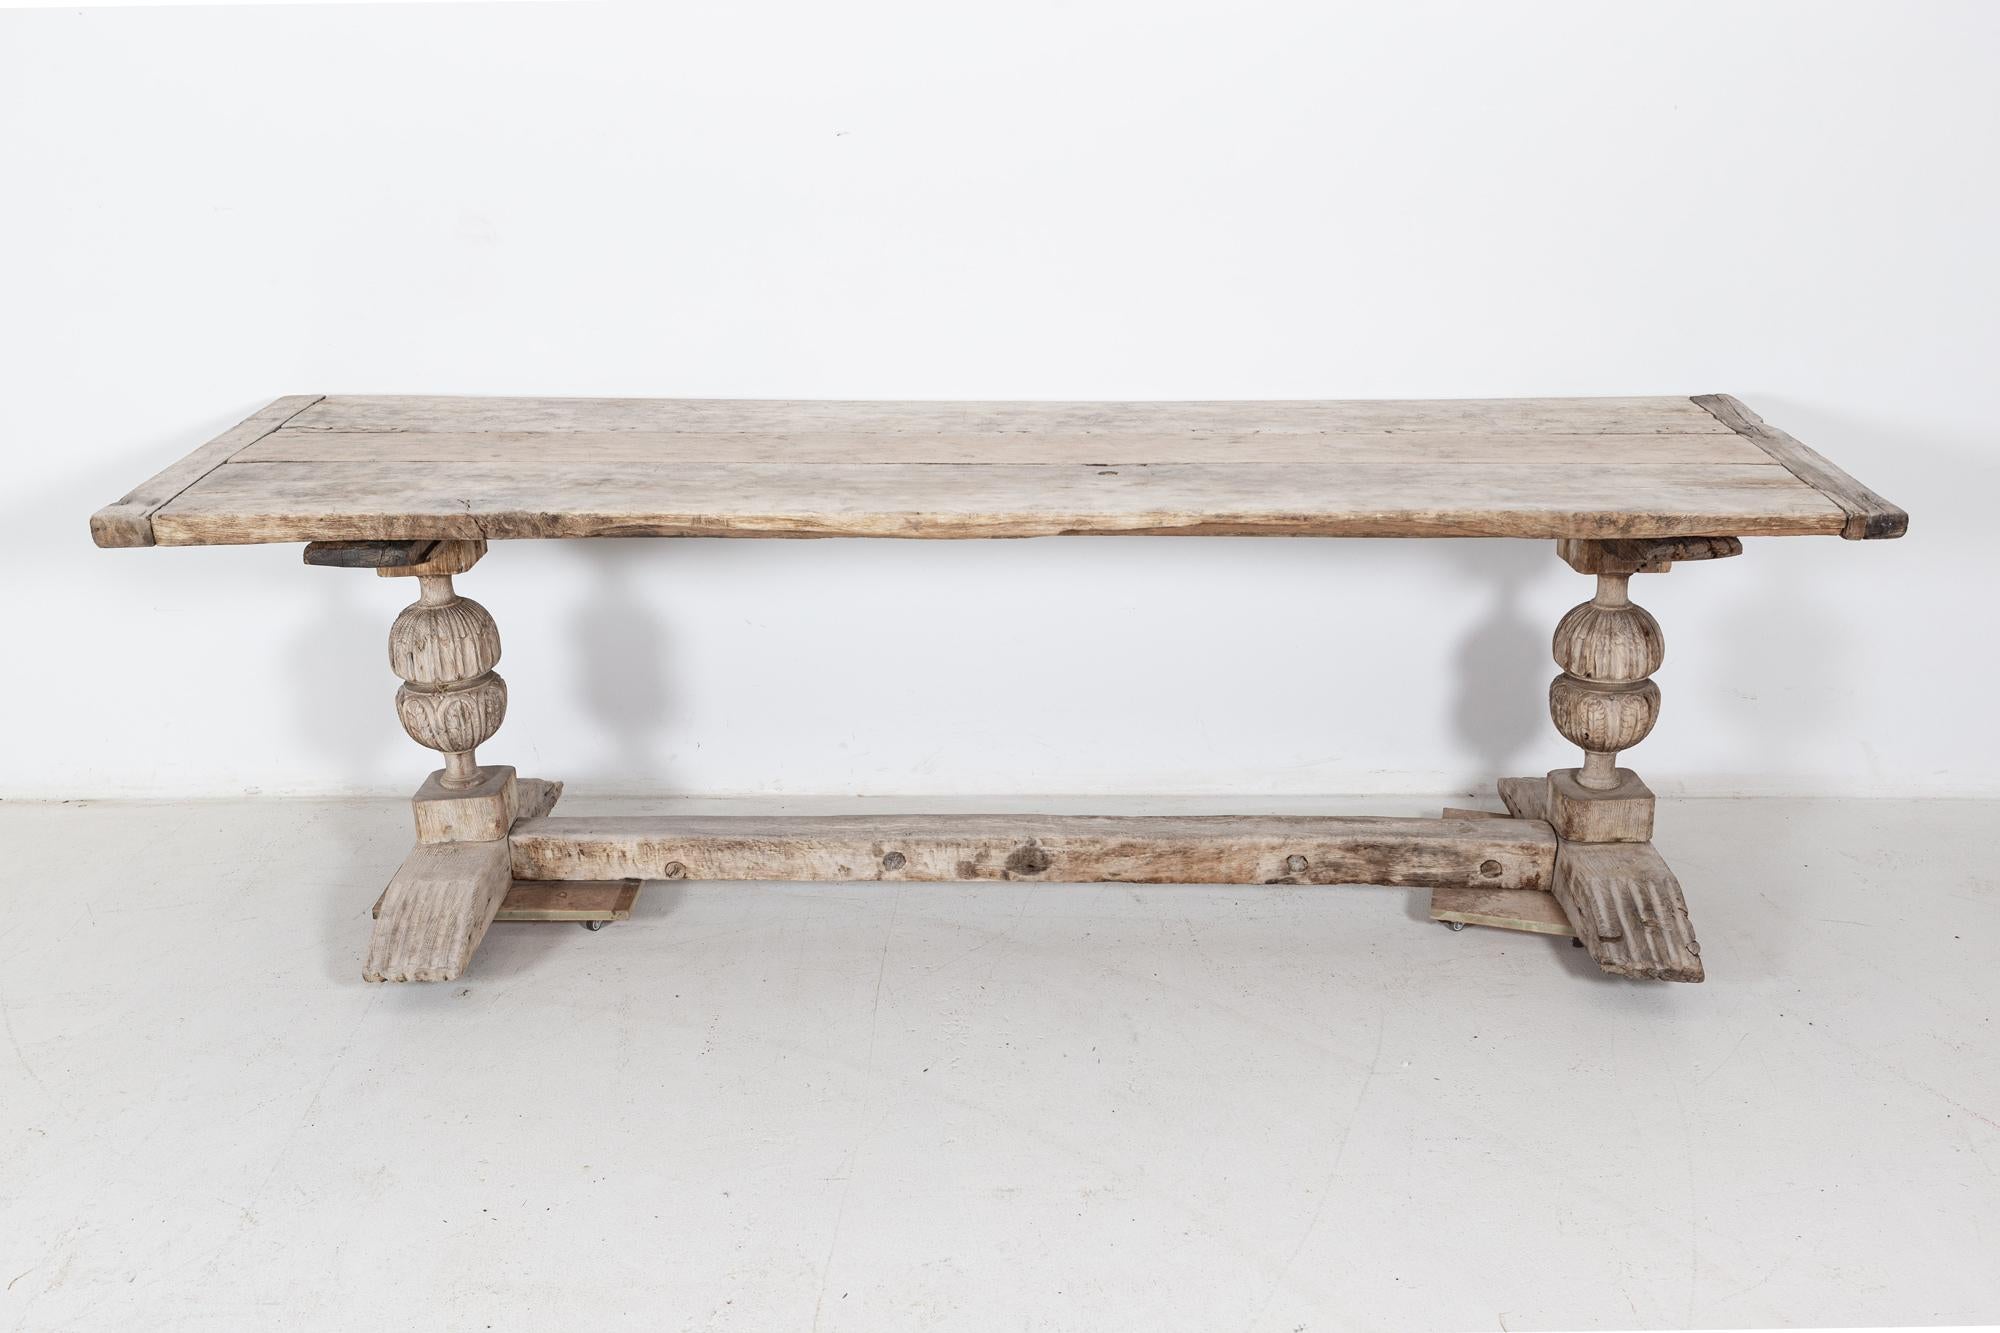 British 17thC English Bleached Oak Refectory Table